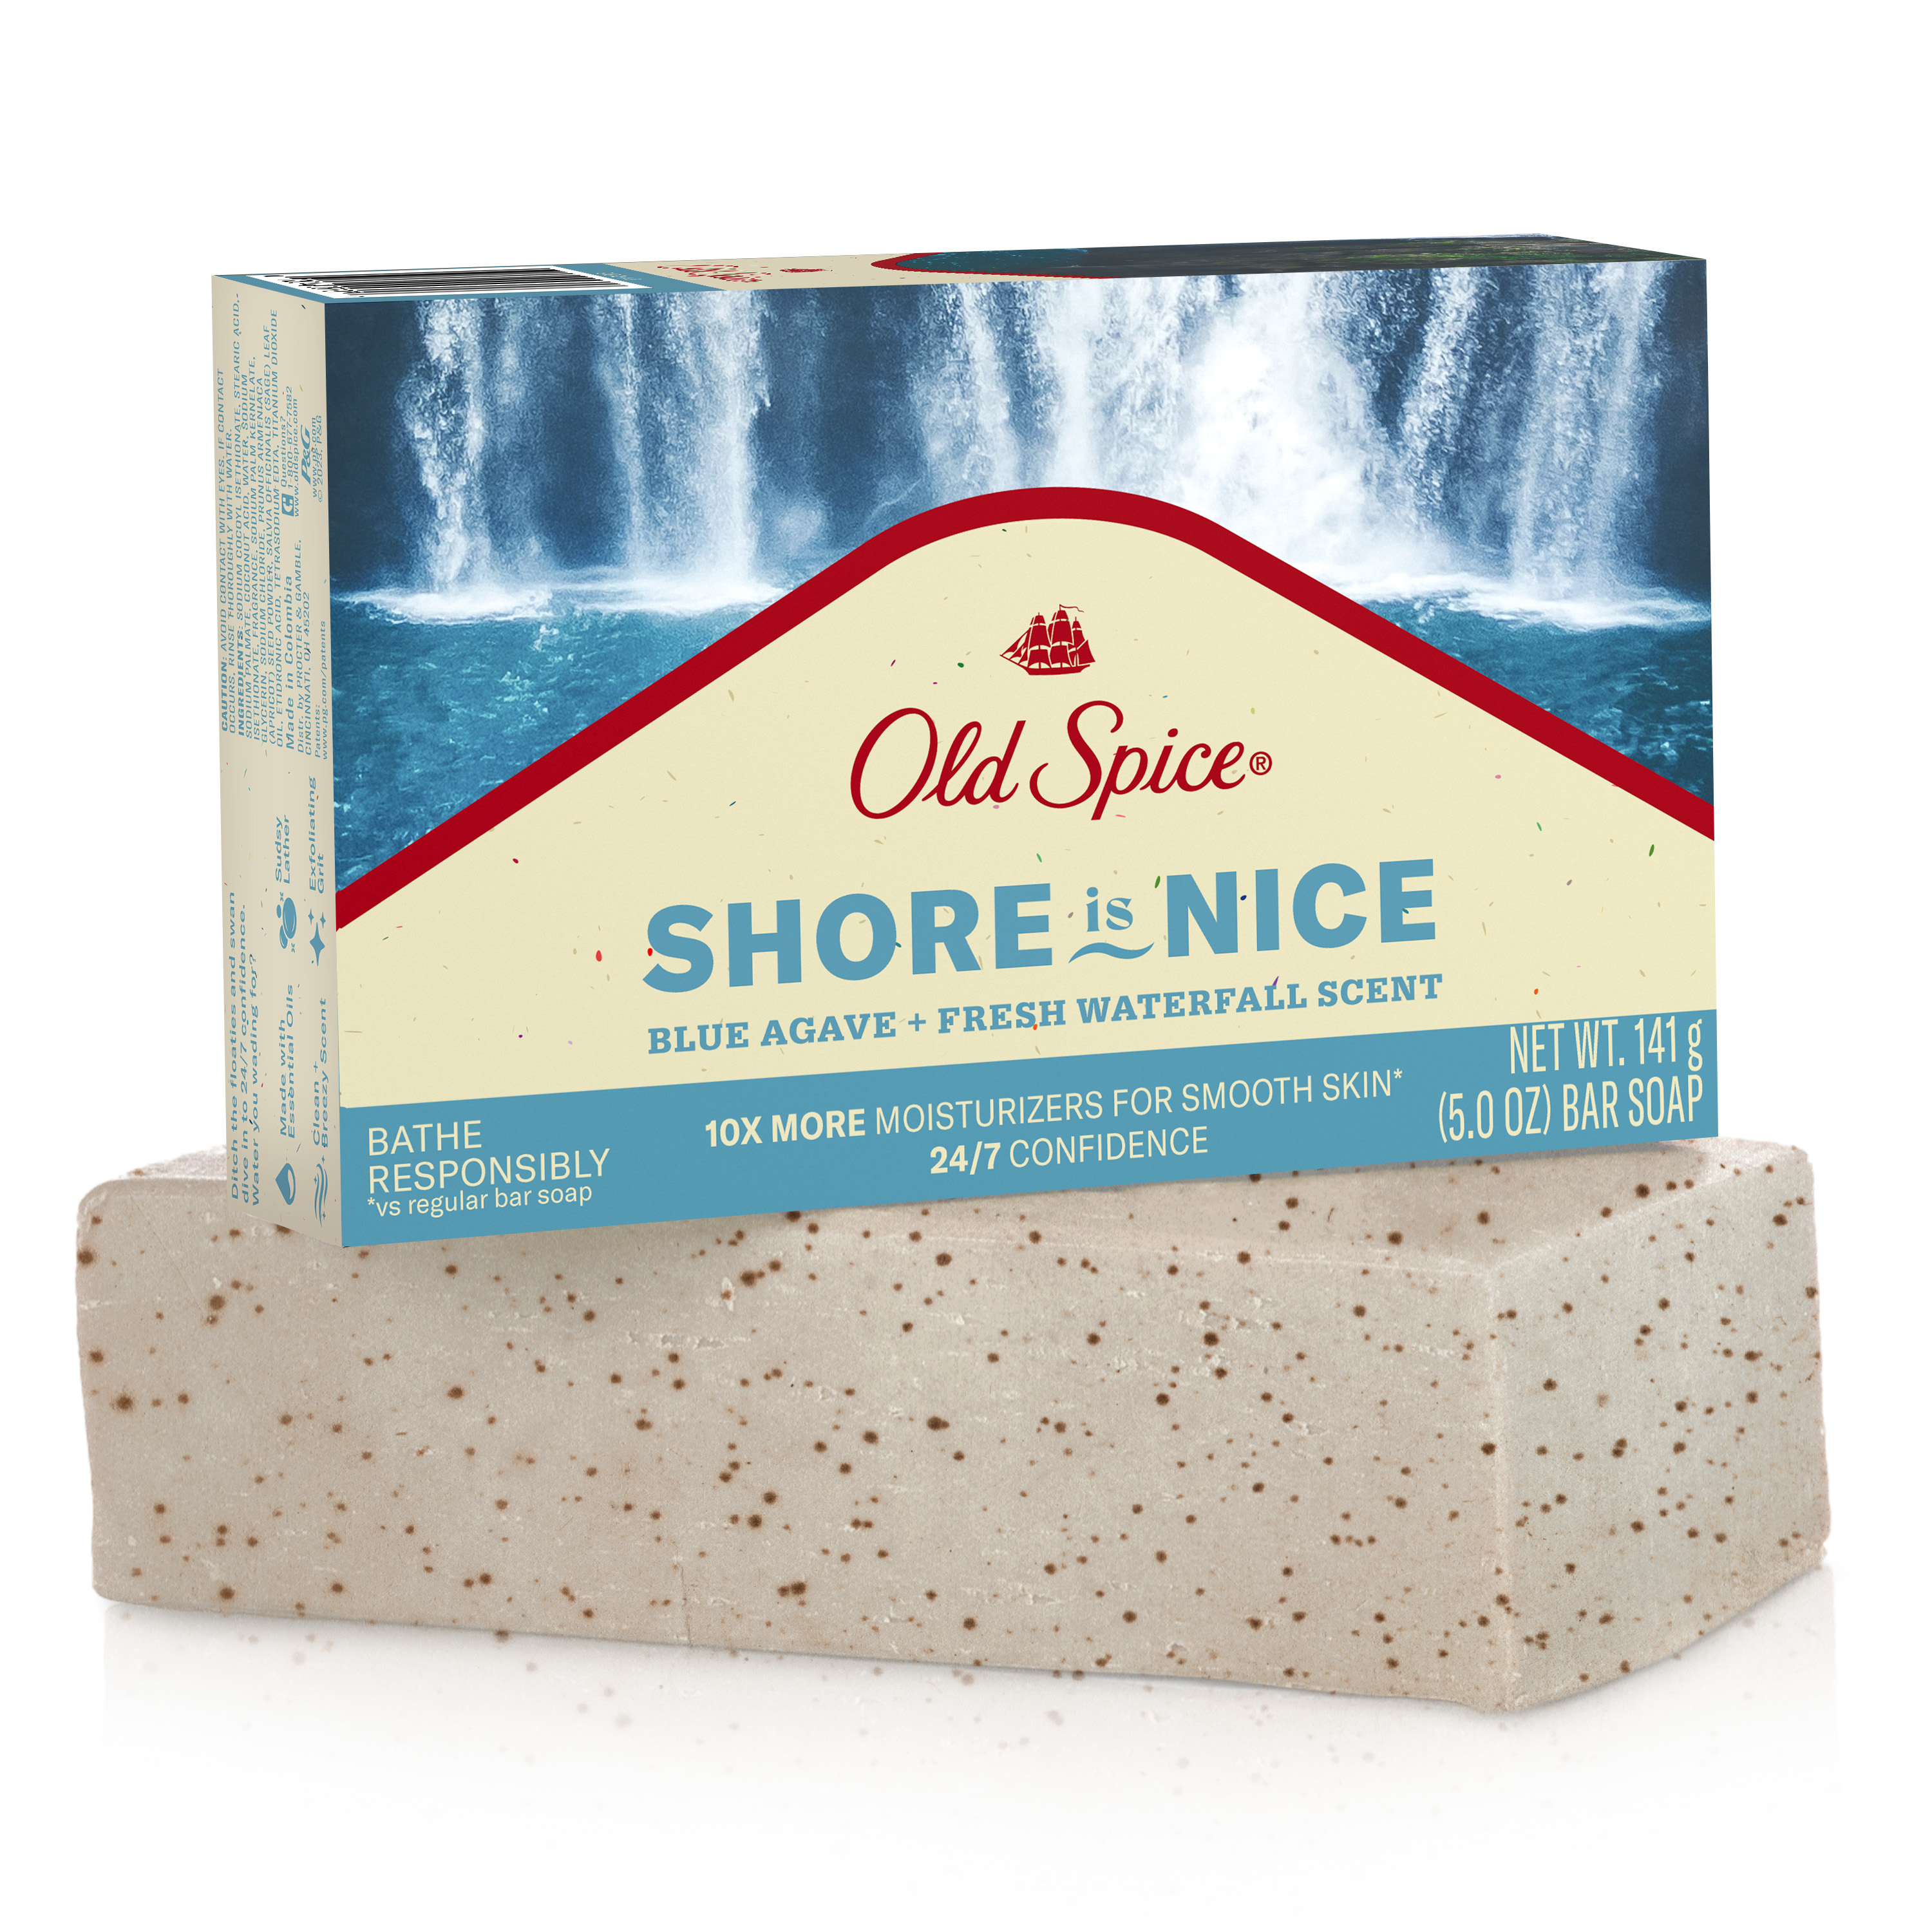 Old Spice Premium Bar Soap, Shore is Nice Blue Agave + Fresh Waterfall Scent